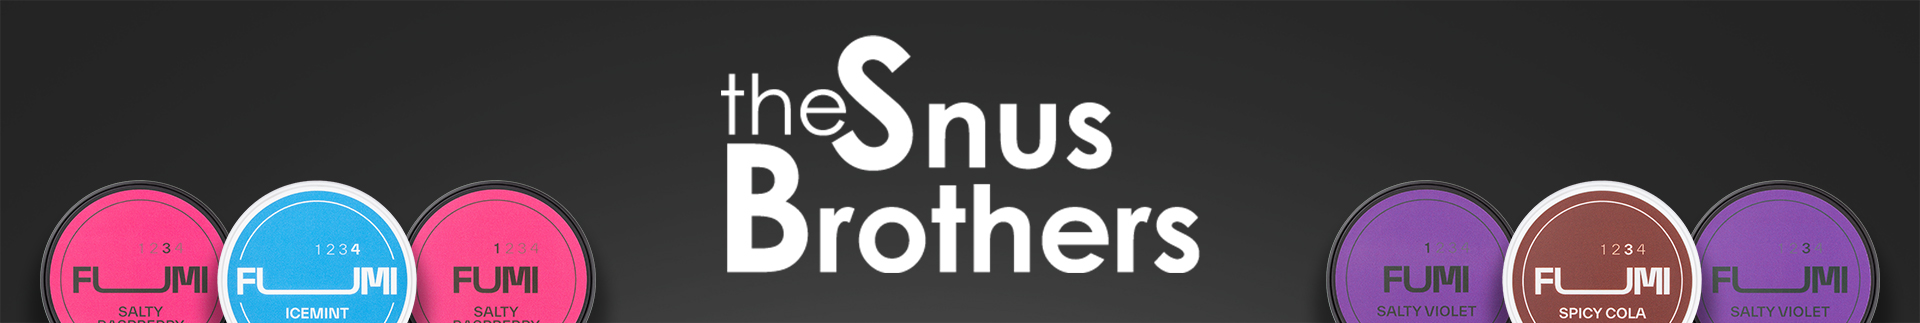 The Snus Brothers